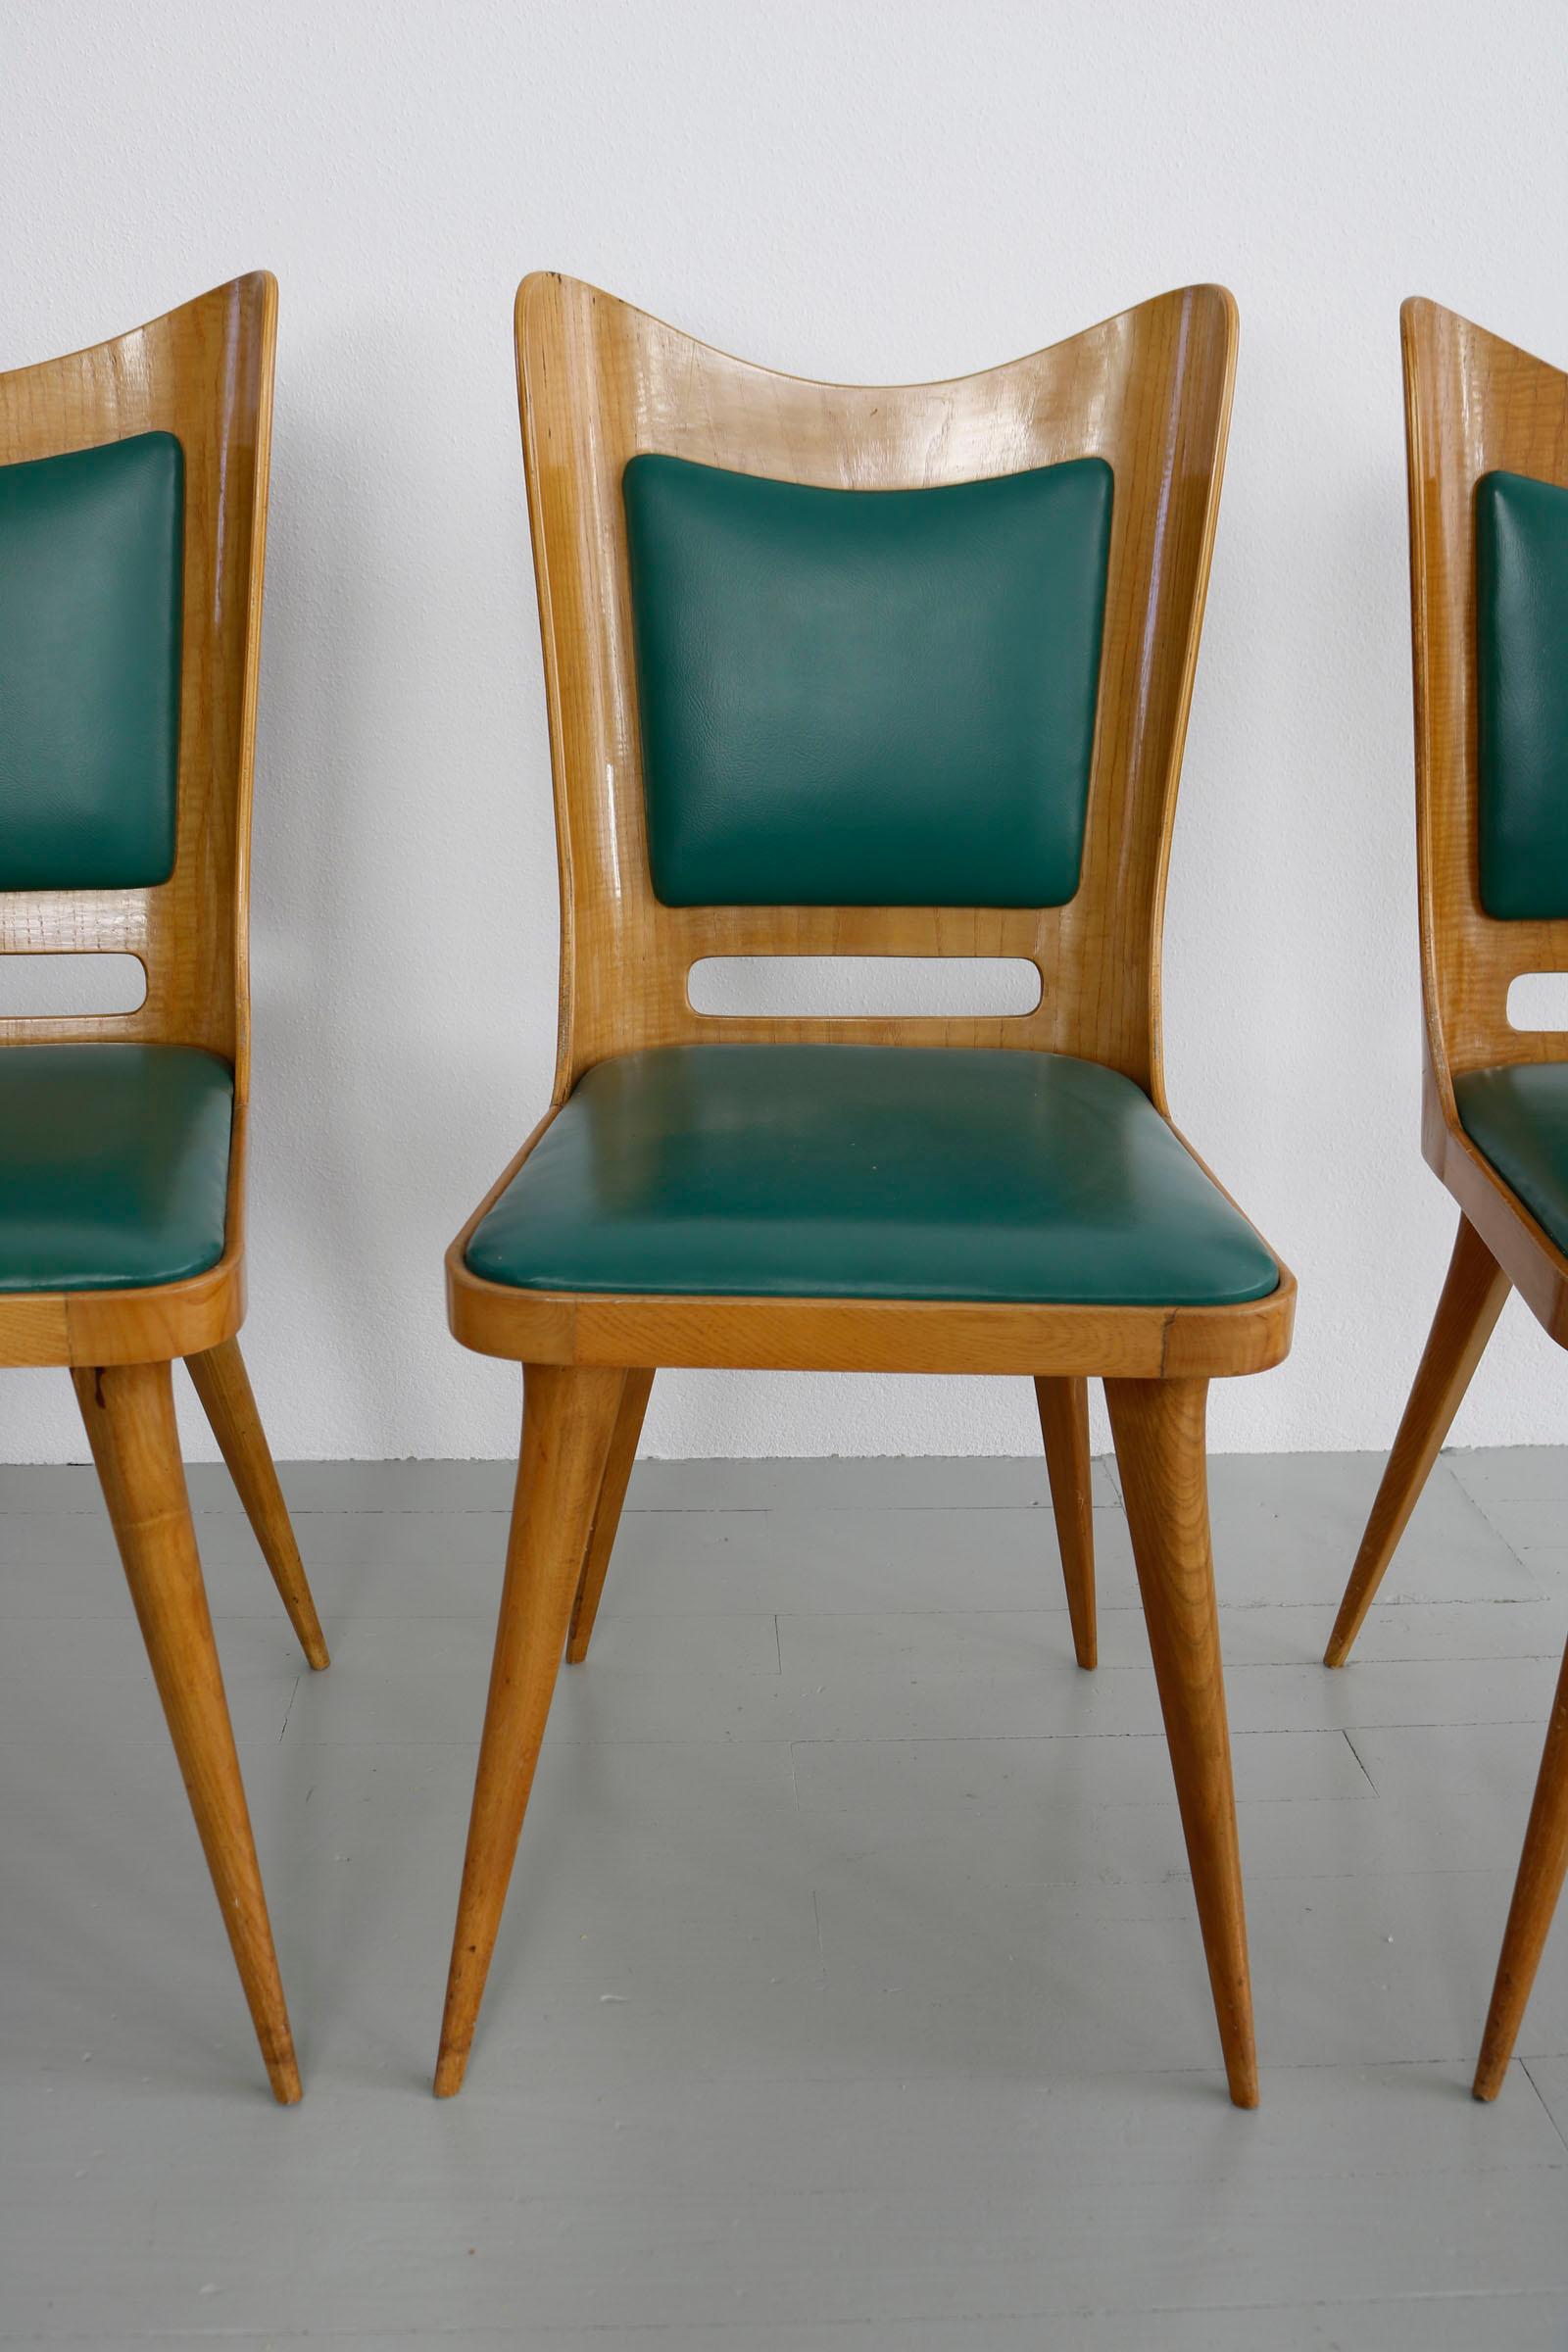 Set of Six Italian Wooden Dining Chairs with Green Upholstery, 1950 For Sale 11